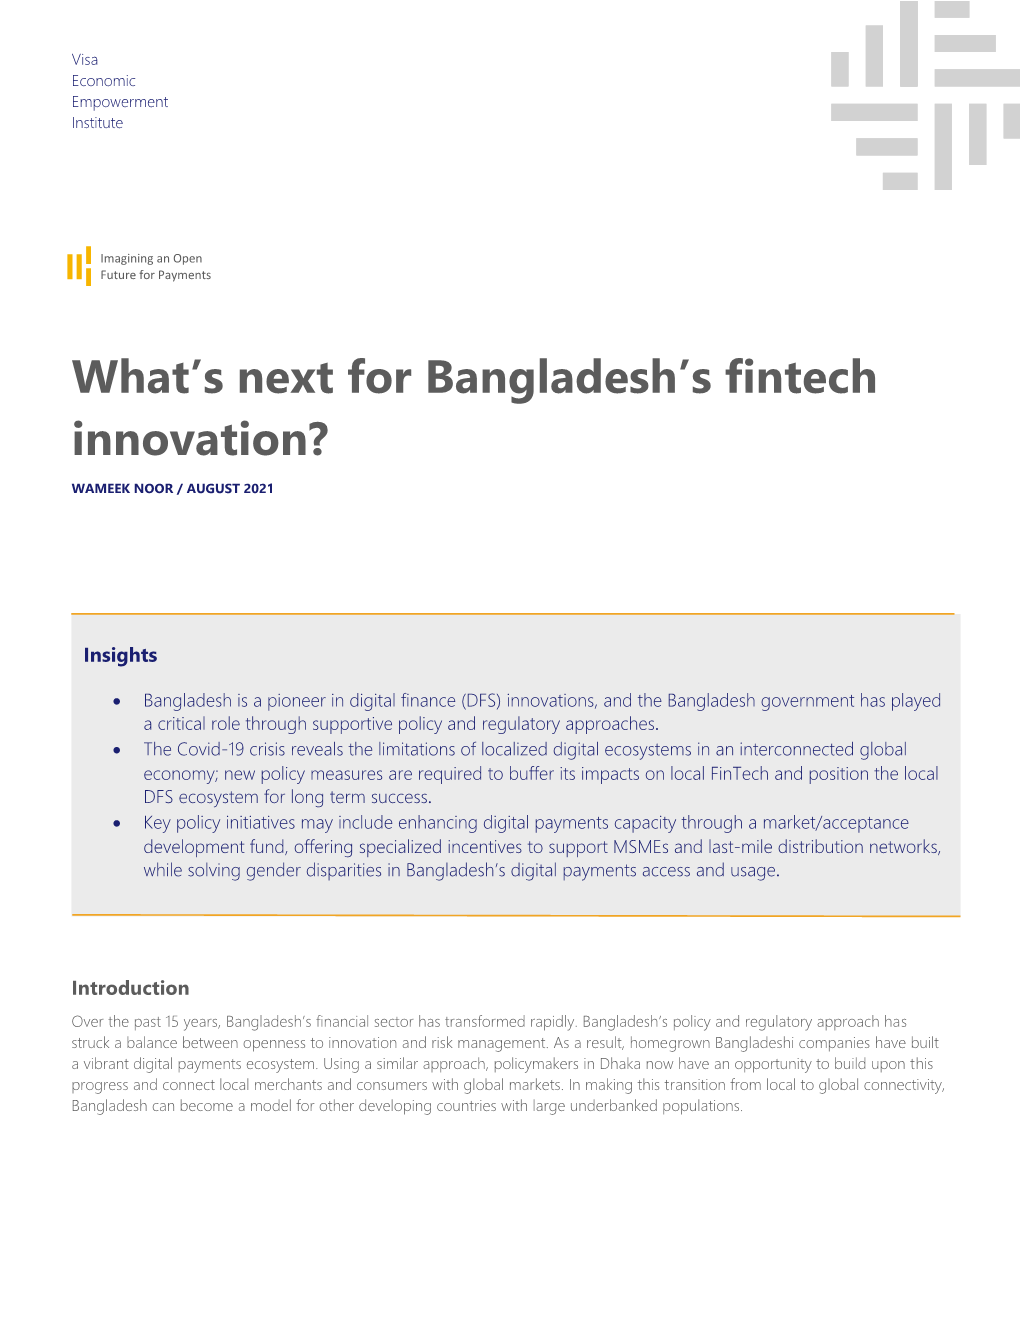 What's Next for Bangladesh's Fintech Innovation?